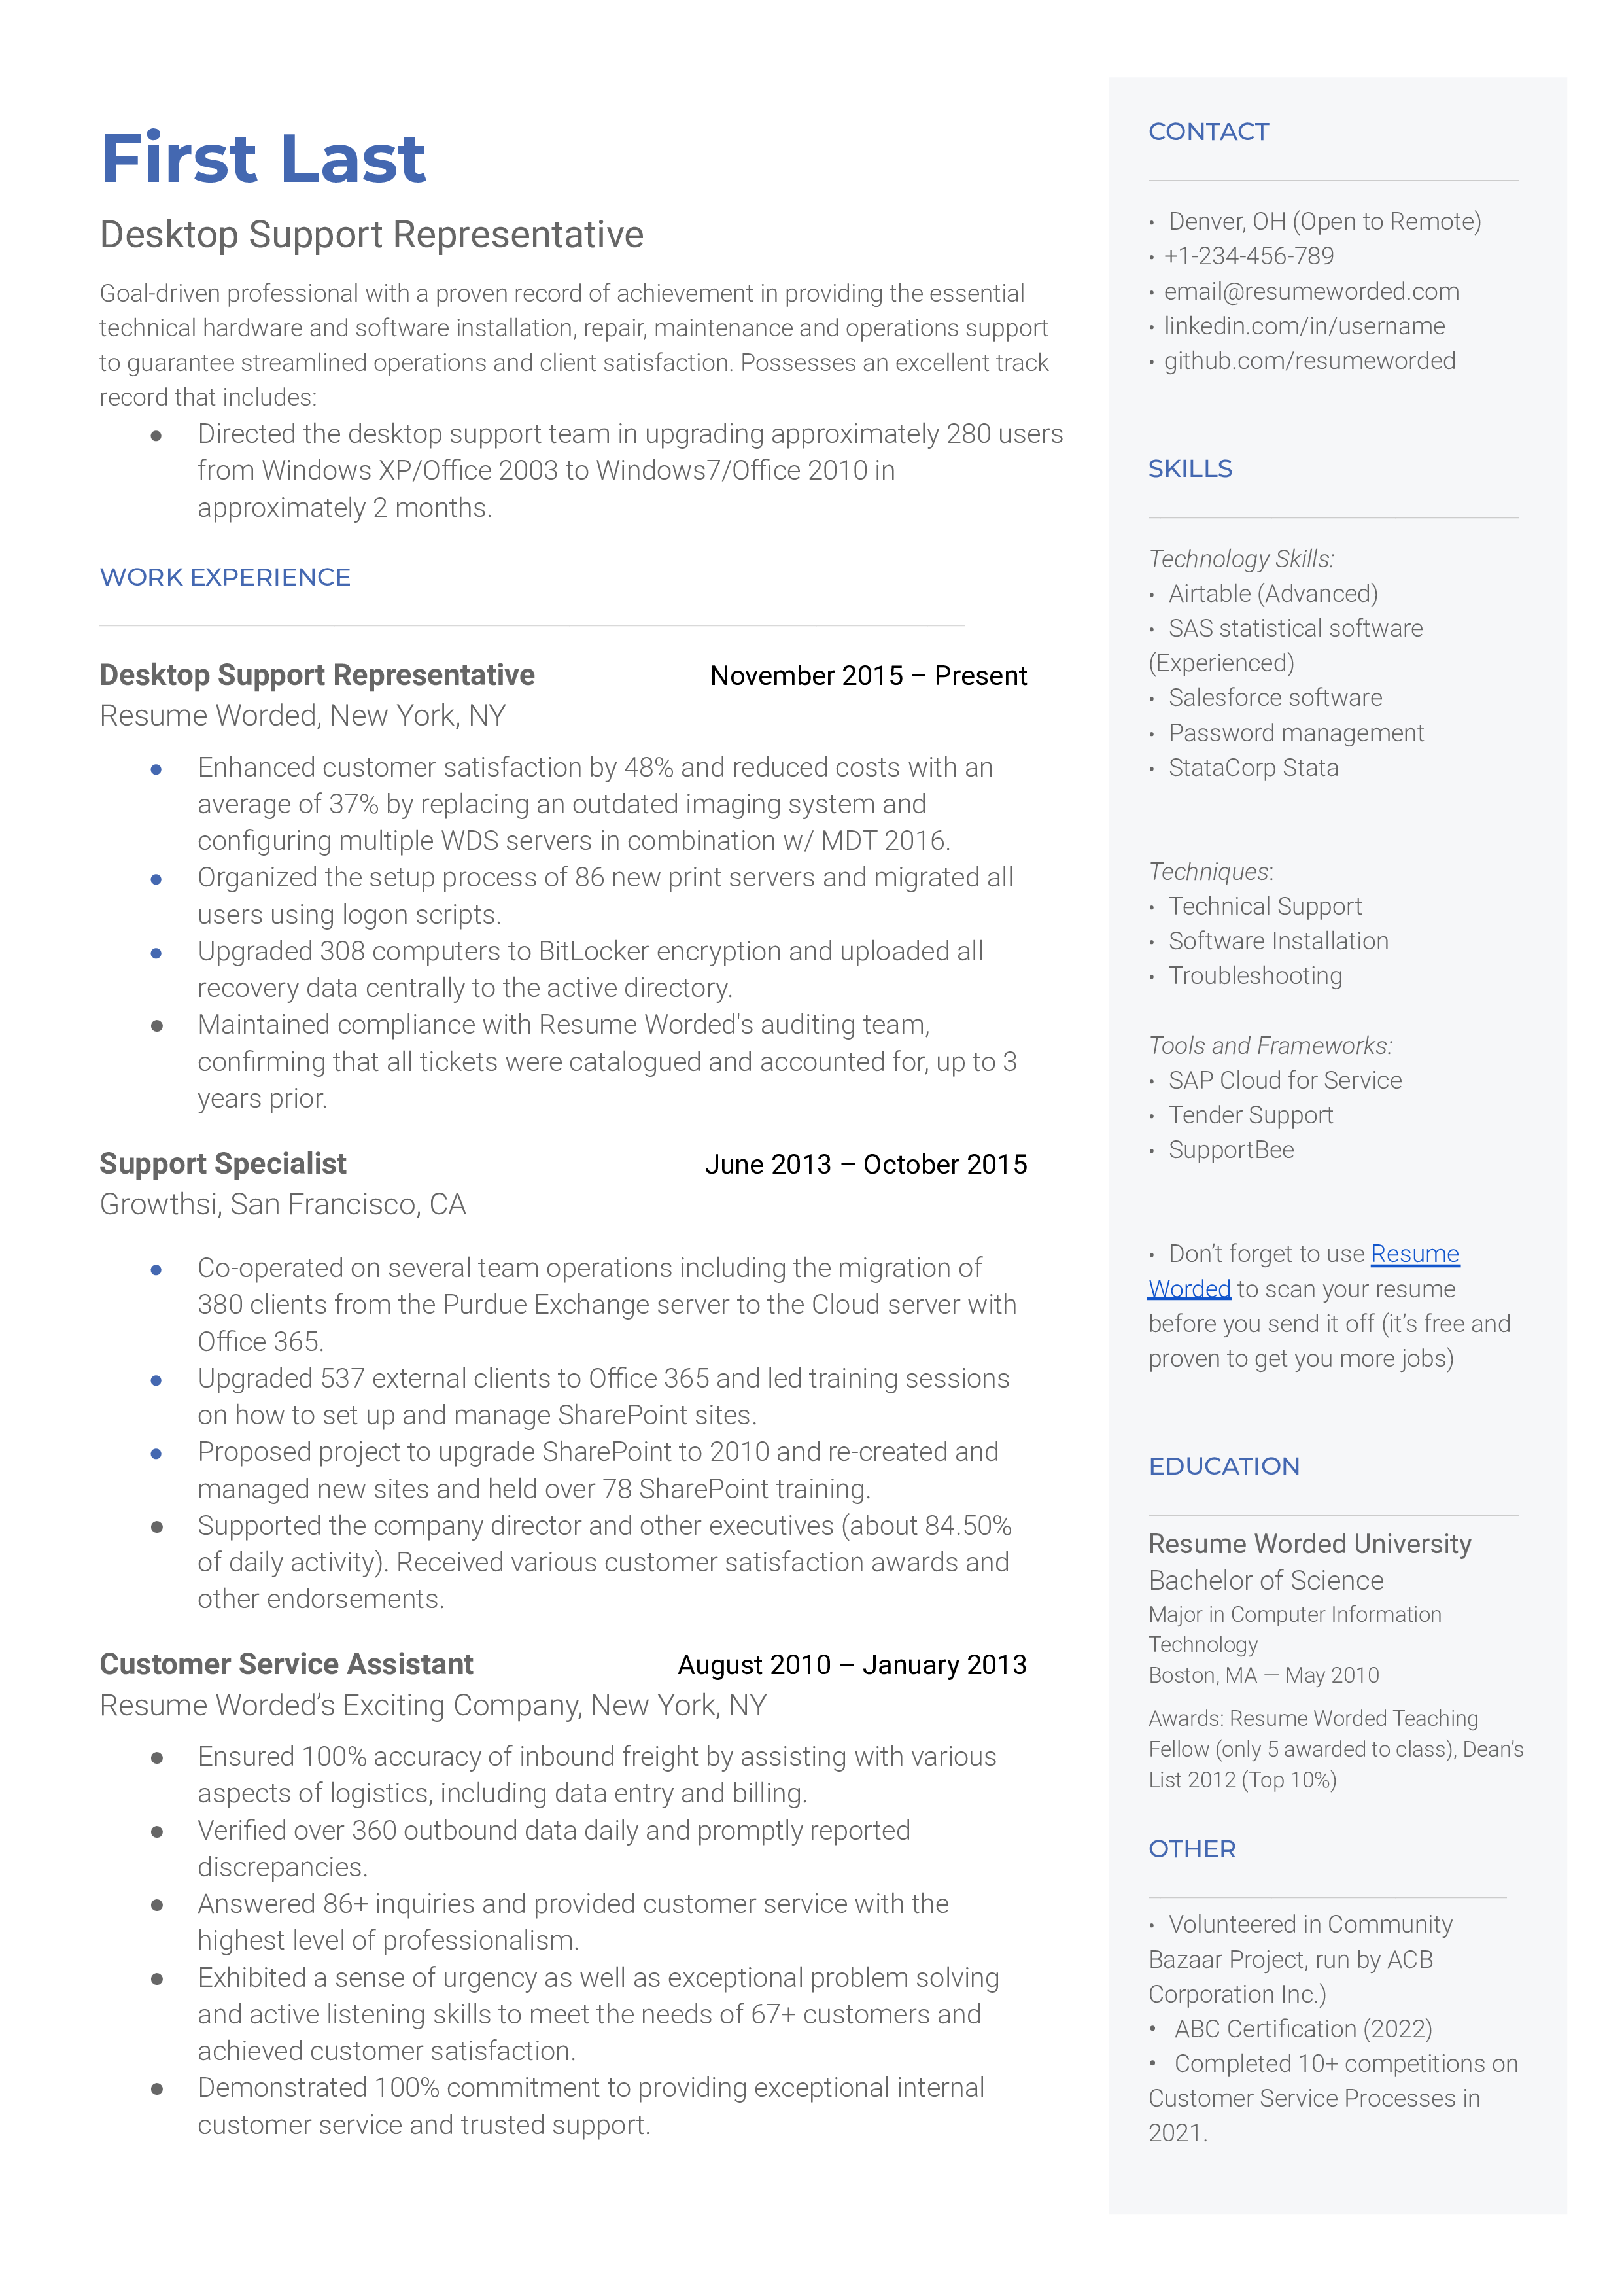 A well-structured CV of a Desktop Support Representative showcasing technical skills and problem-solving capabilities.